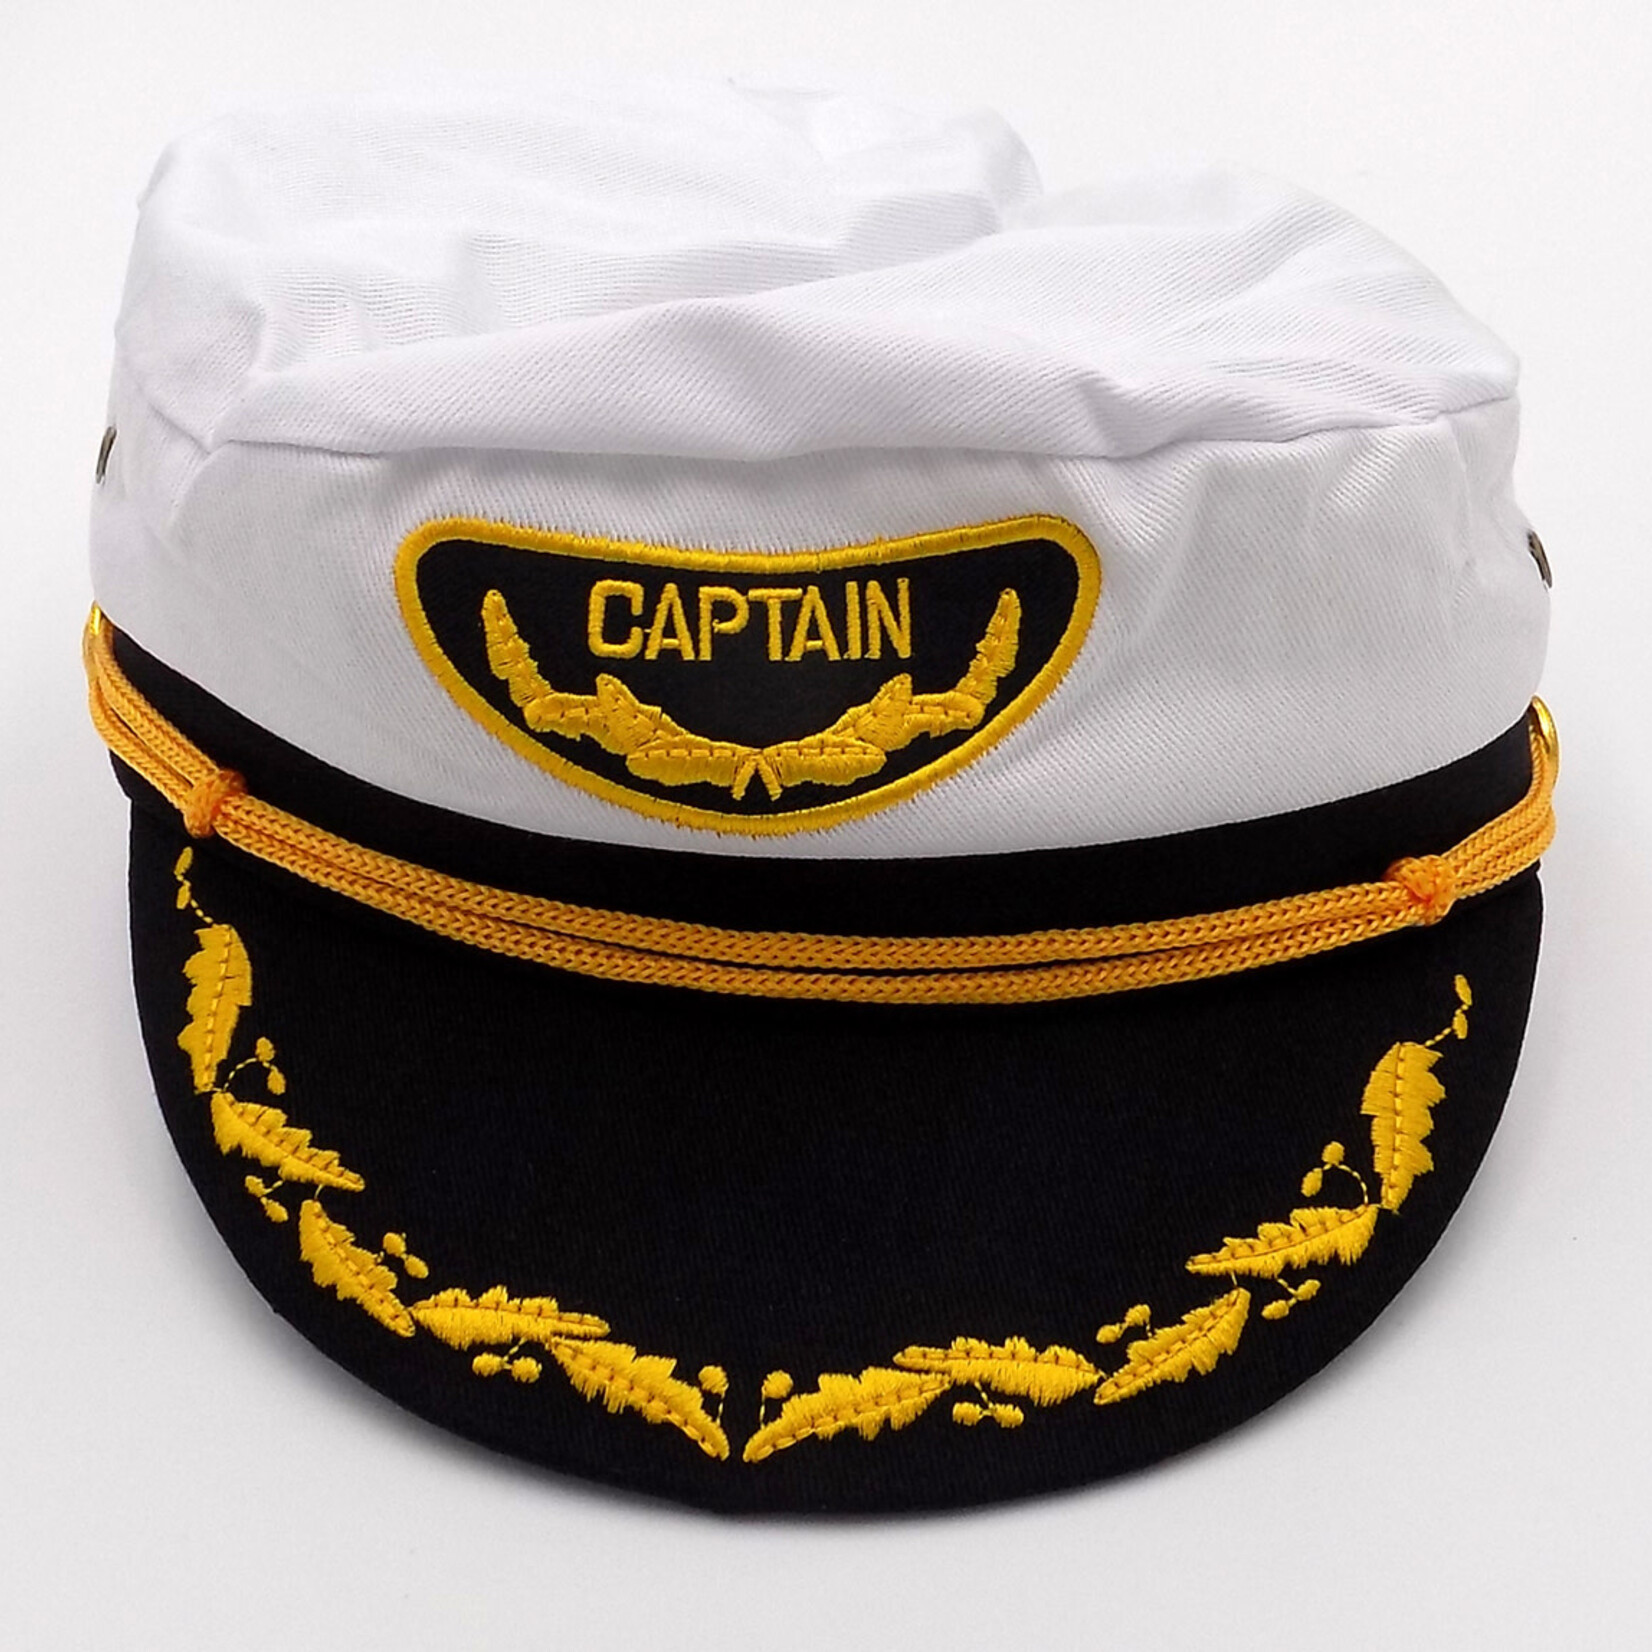 Captin Hats With Adjustable Straps White And Black